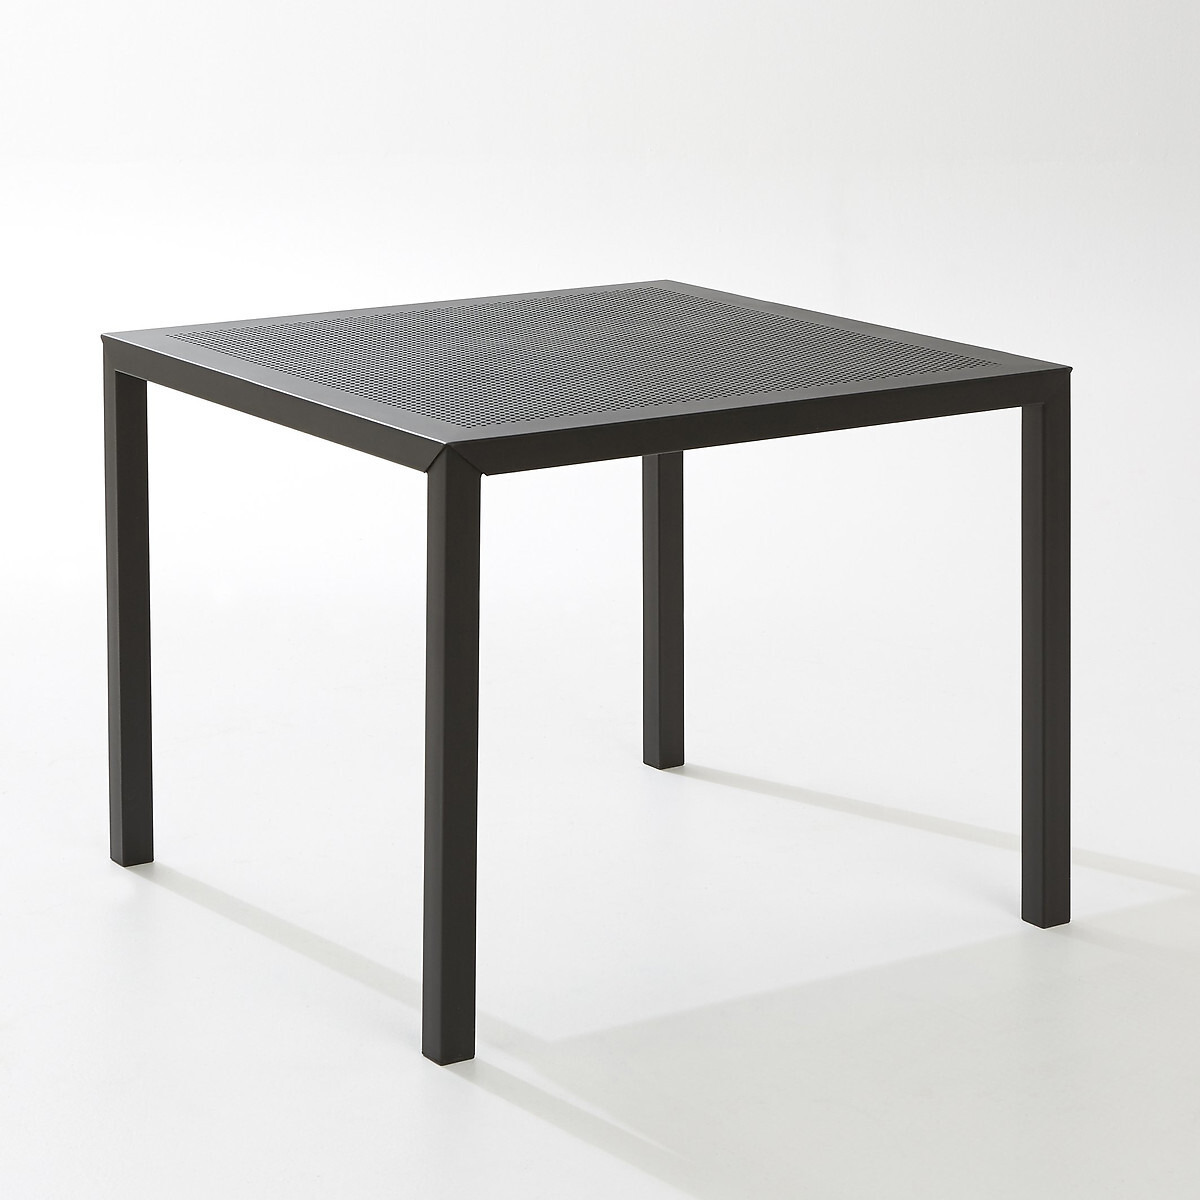 Choe Square Perforated Metal Garden Table - image 1